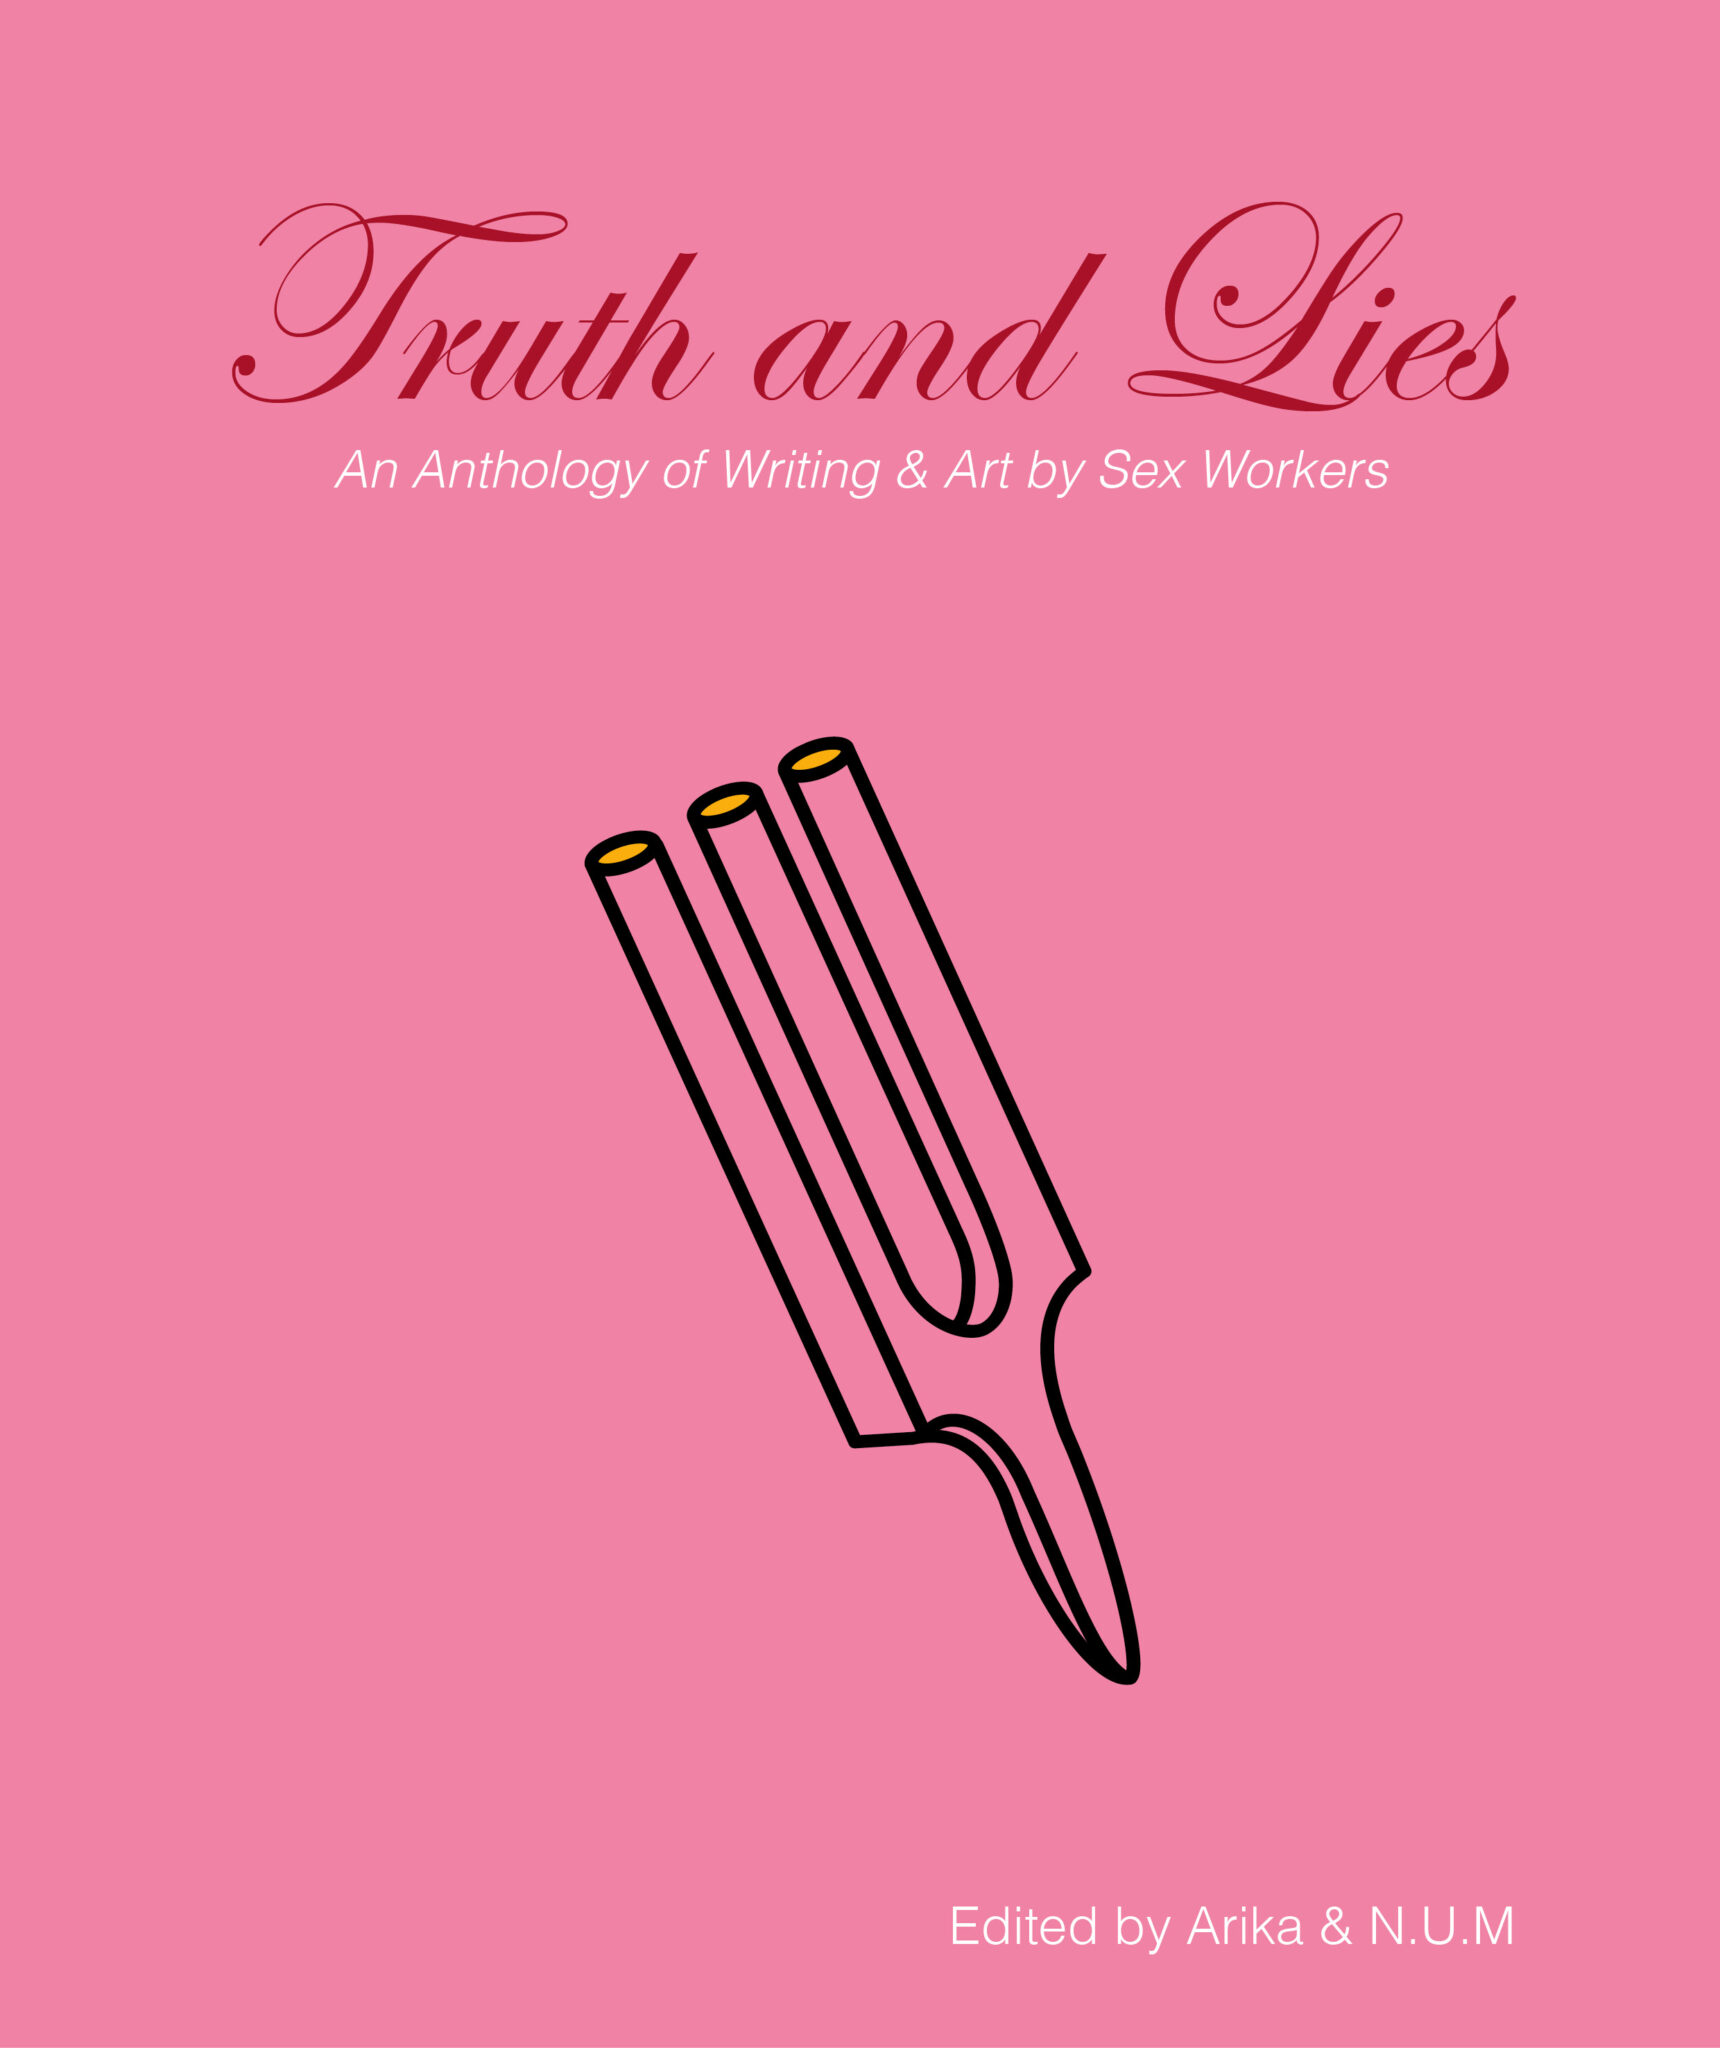 A pink book cover says "Truth and Lies: an anthology of writing and art by sex workers"